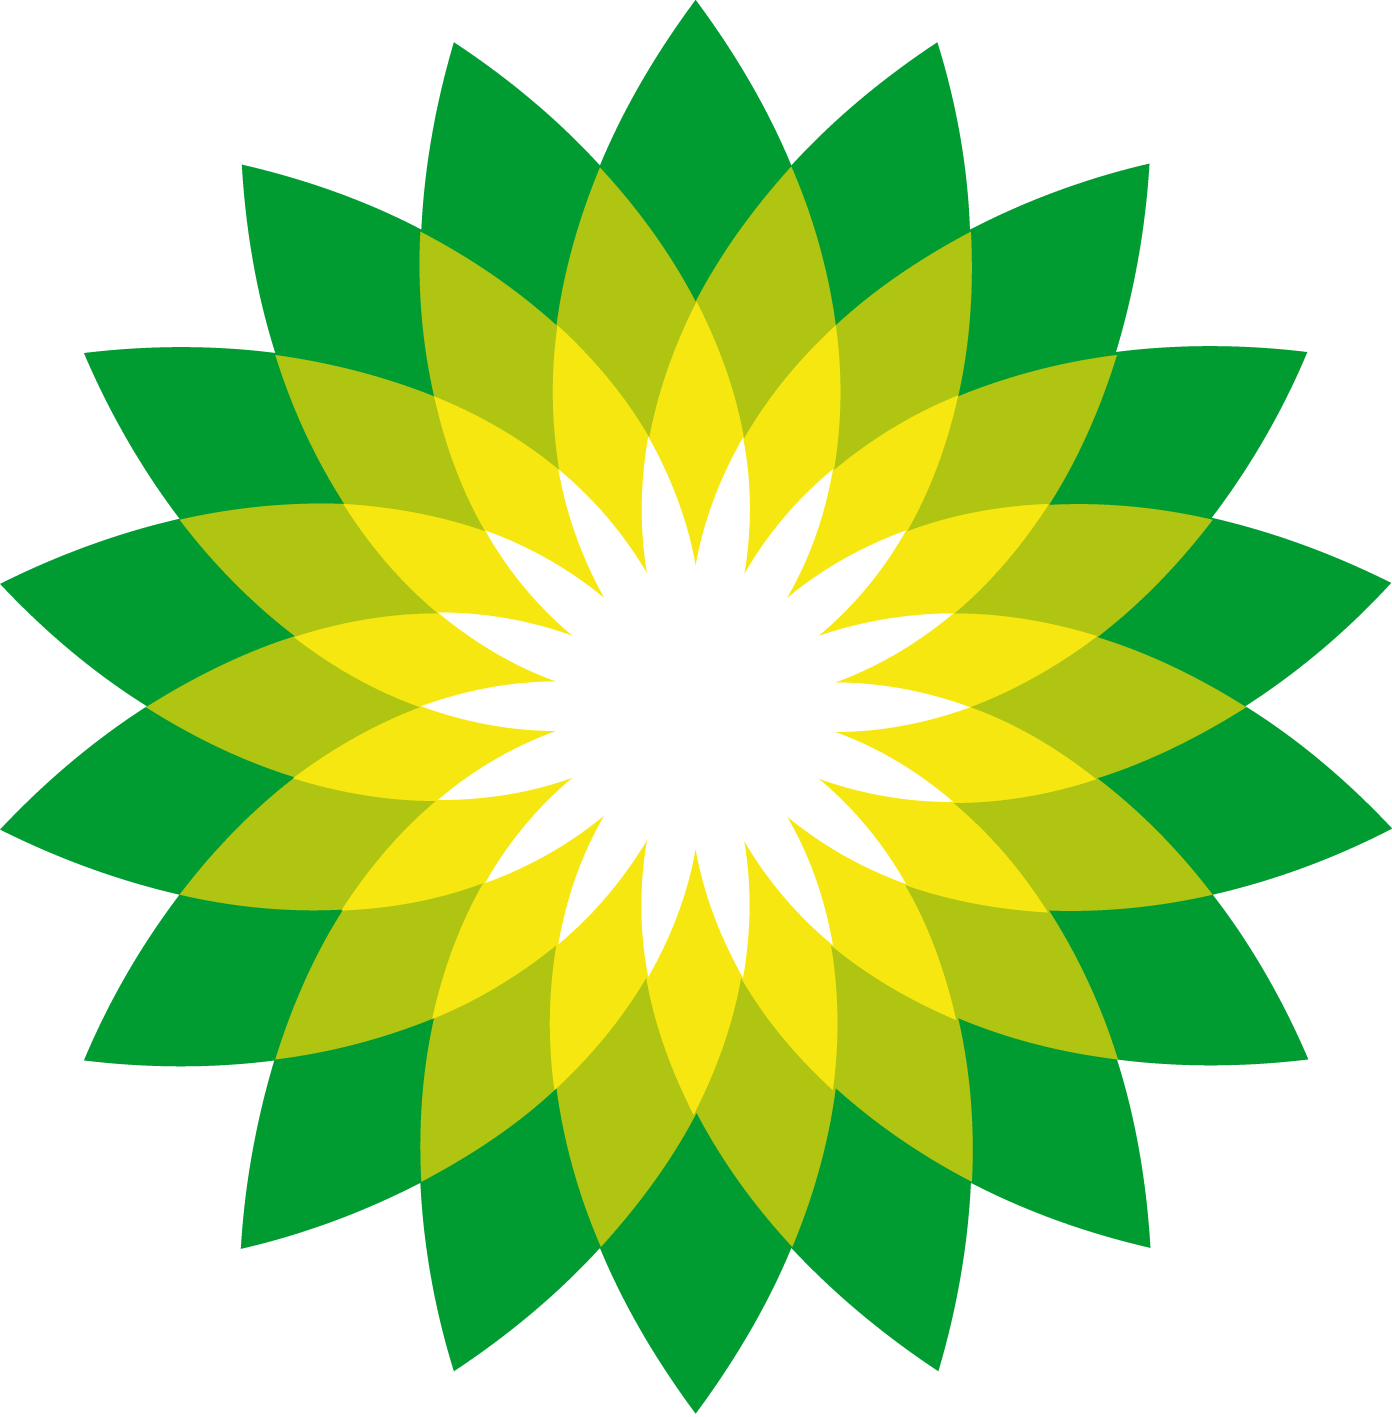 Green and Yellow Flower Logo - BP mission statement 2013 - Strategic Management Insight